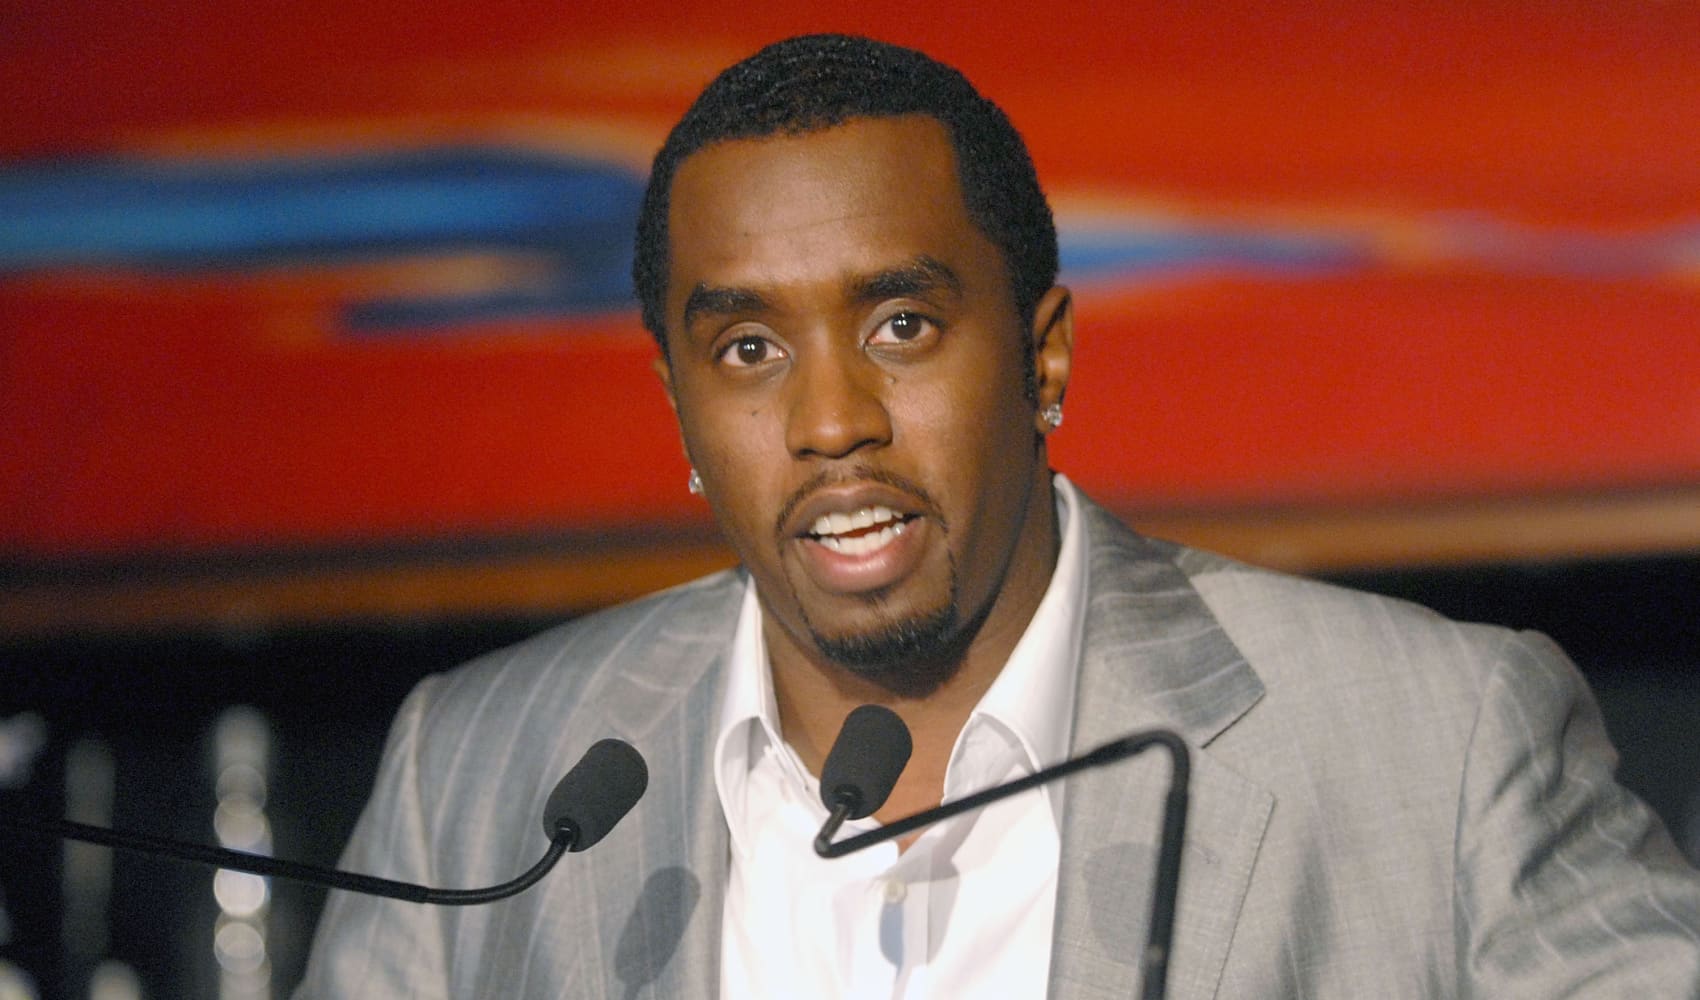 Sean 'Diddy' Combs accused of sexual abuse by two more women – NBC New York